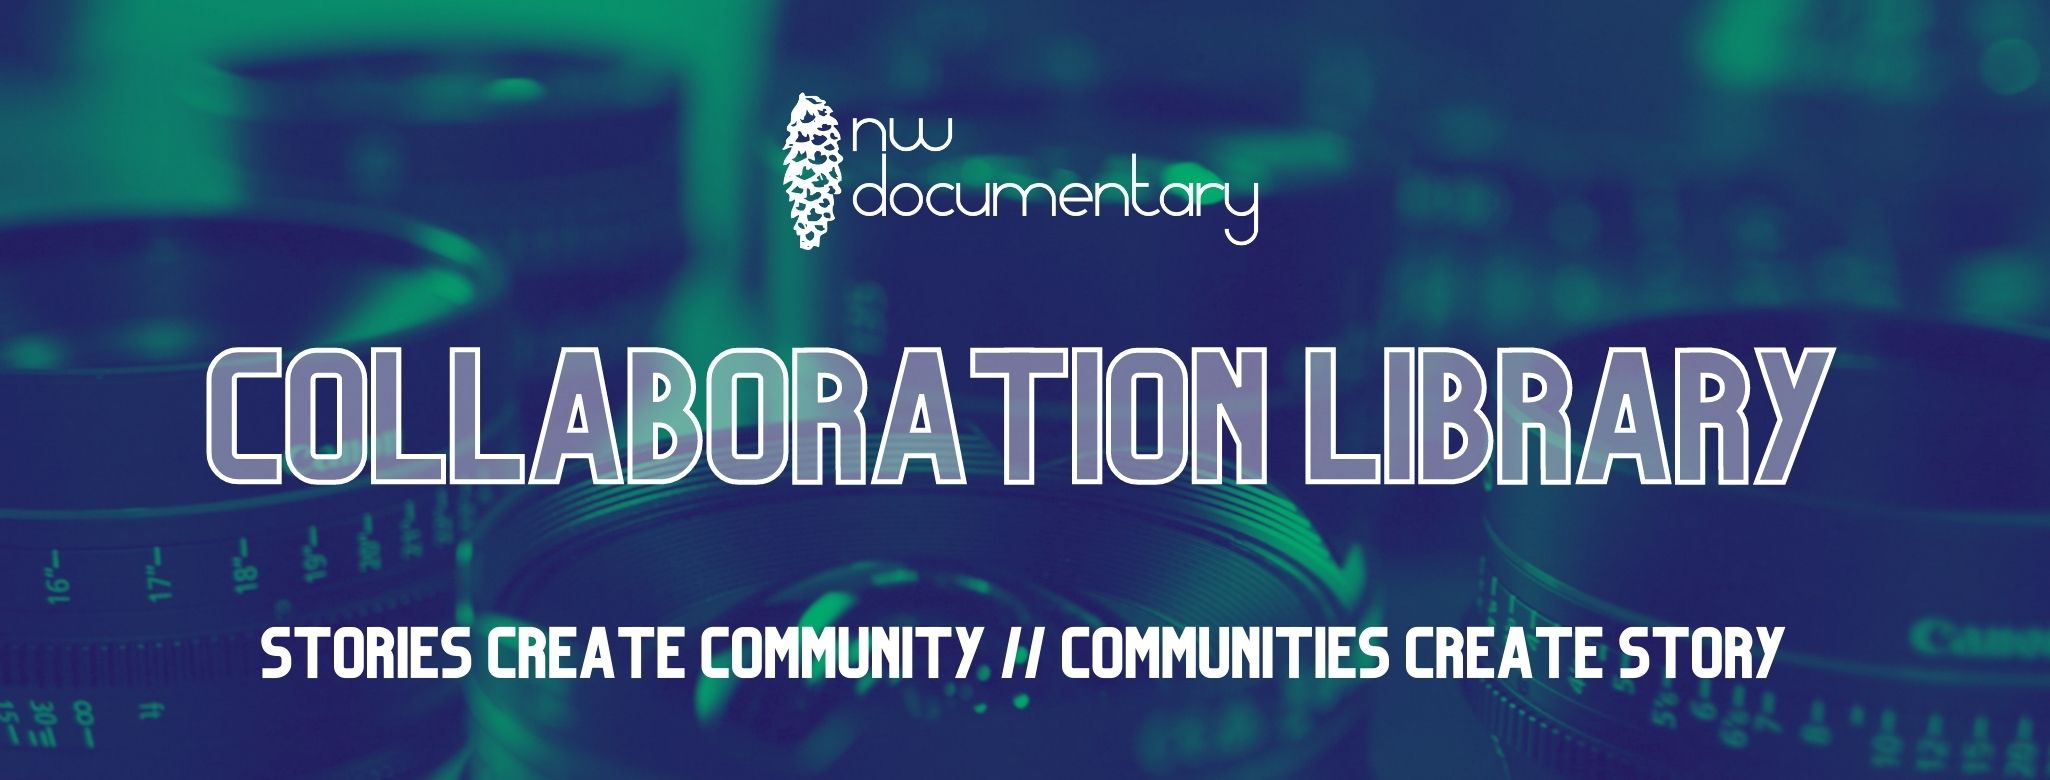 NW Documentary Collaboration Library: Stories Create Community // Communities Create Story